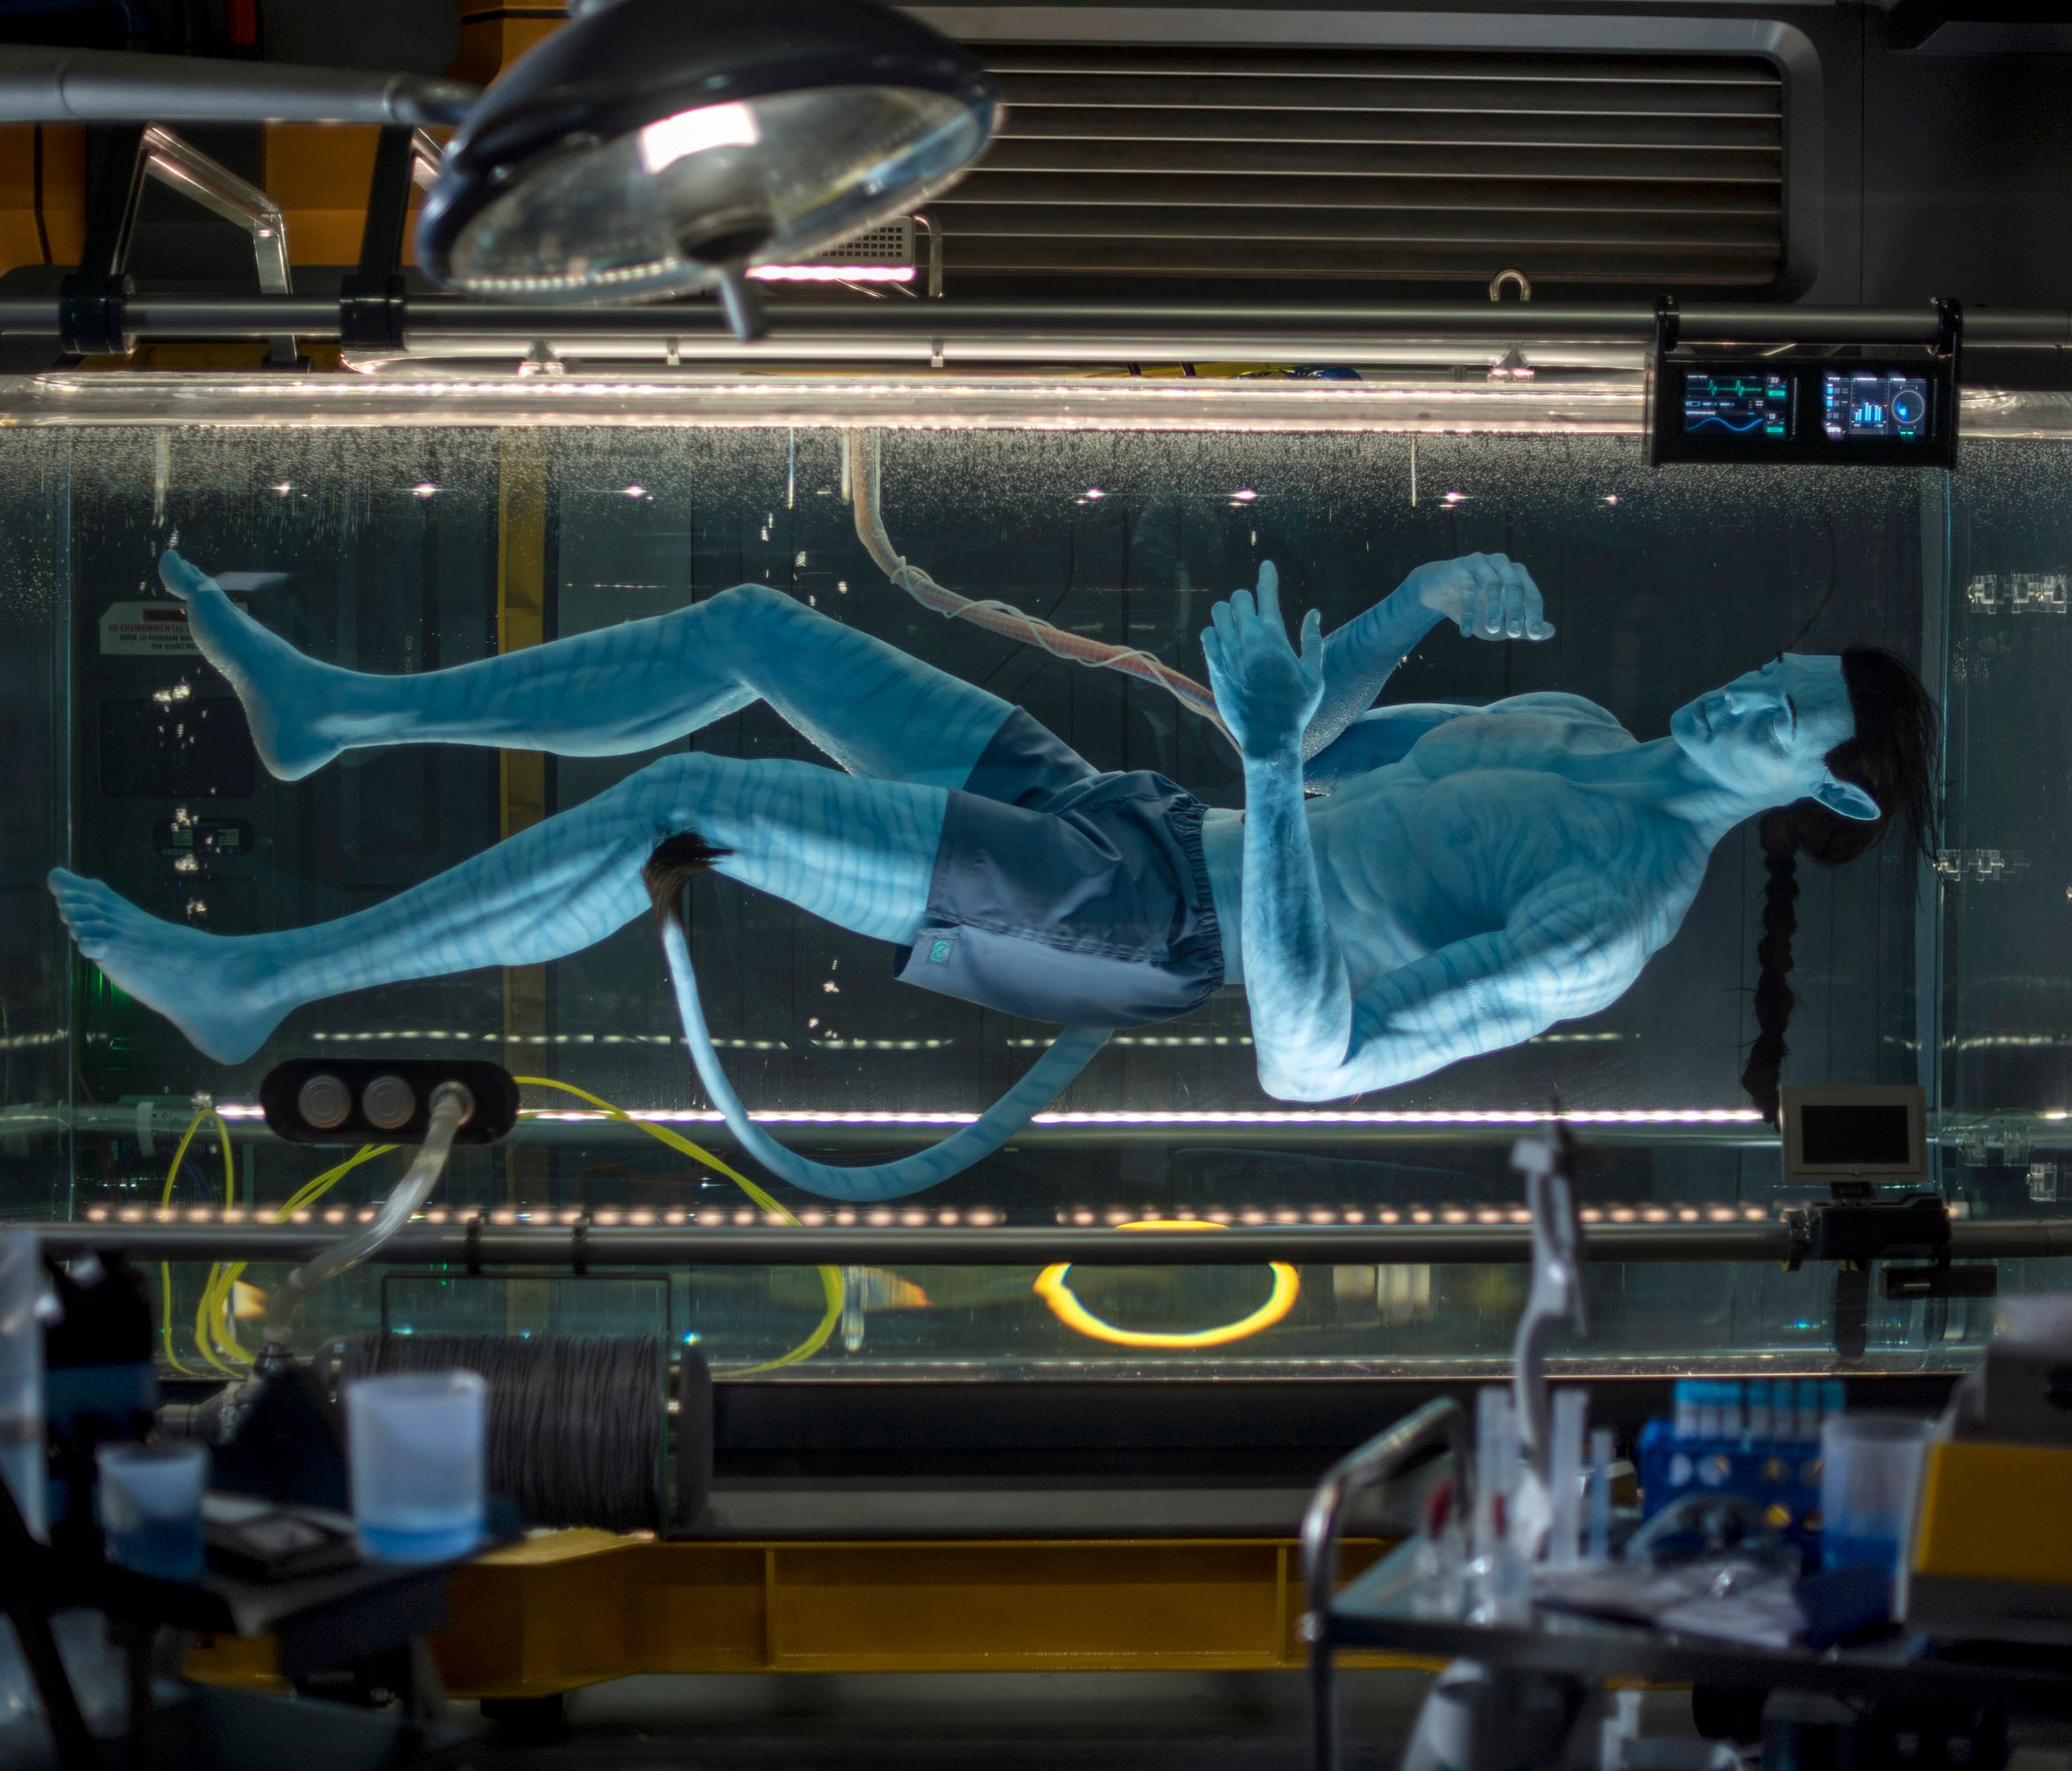 Avatar Flight of Passage, a 3-D thrilling adventure set to open on Pandora Ð The World of Avatar at DisneyÕs Animal Kingdom, offers guests the chance to connect with an avatar and soar on a banshee over Pandora. The journey begins in the queue, as gu